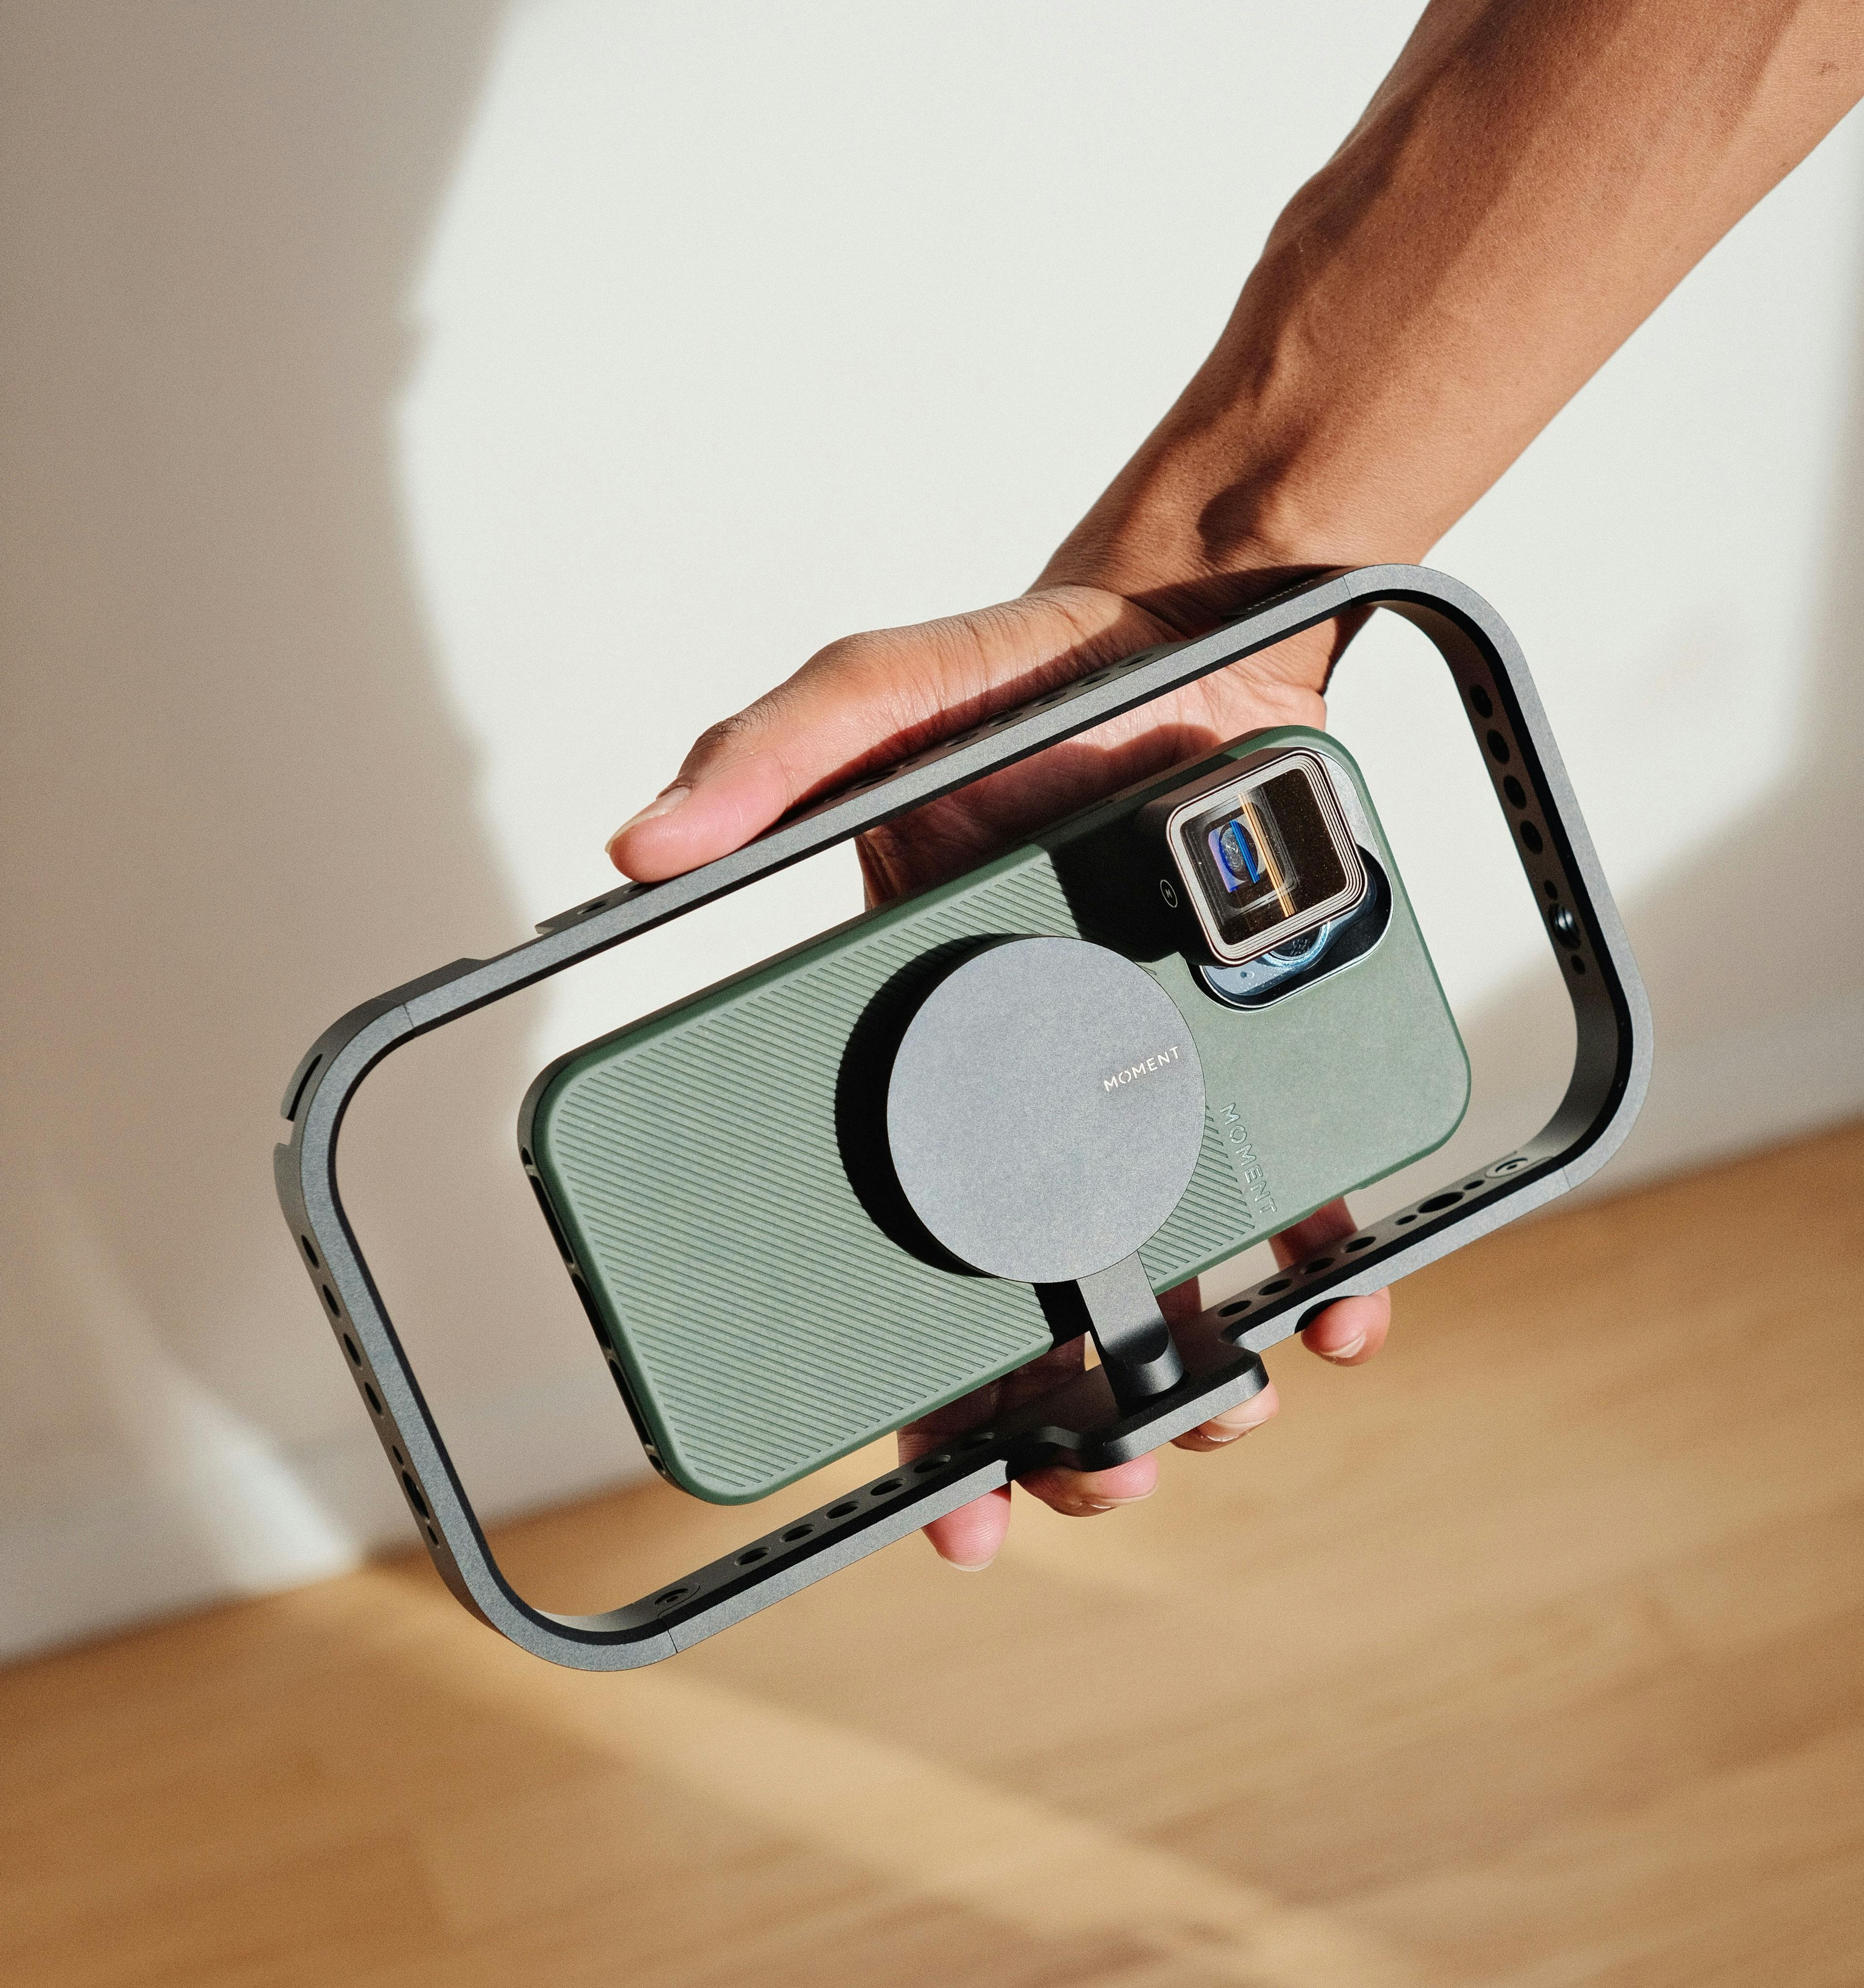 Dress up the iPhone with a Moment Filmmaker cage.